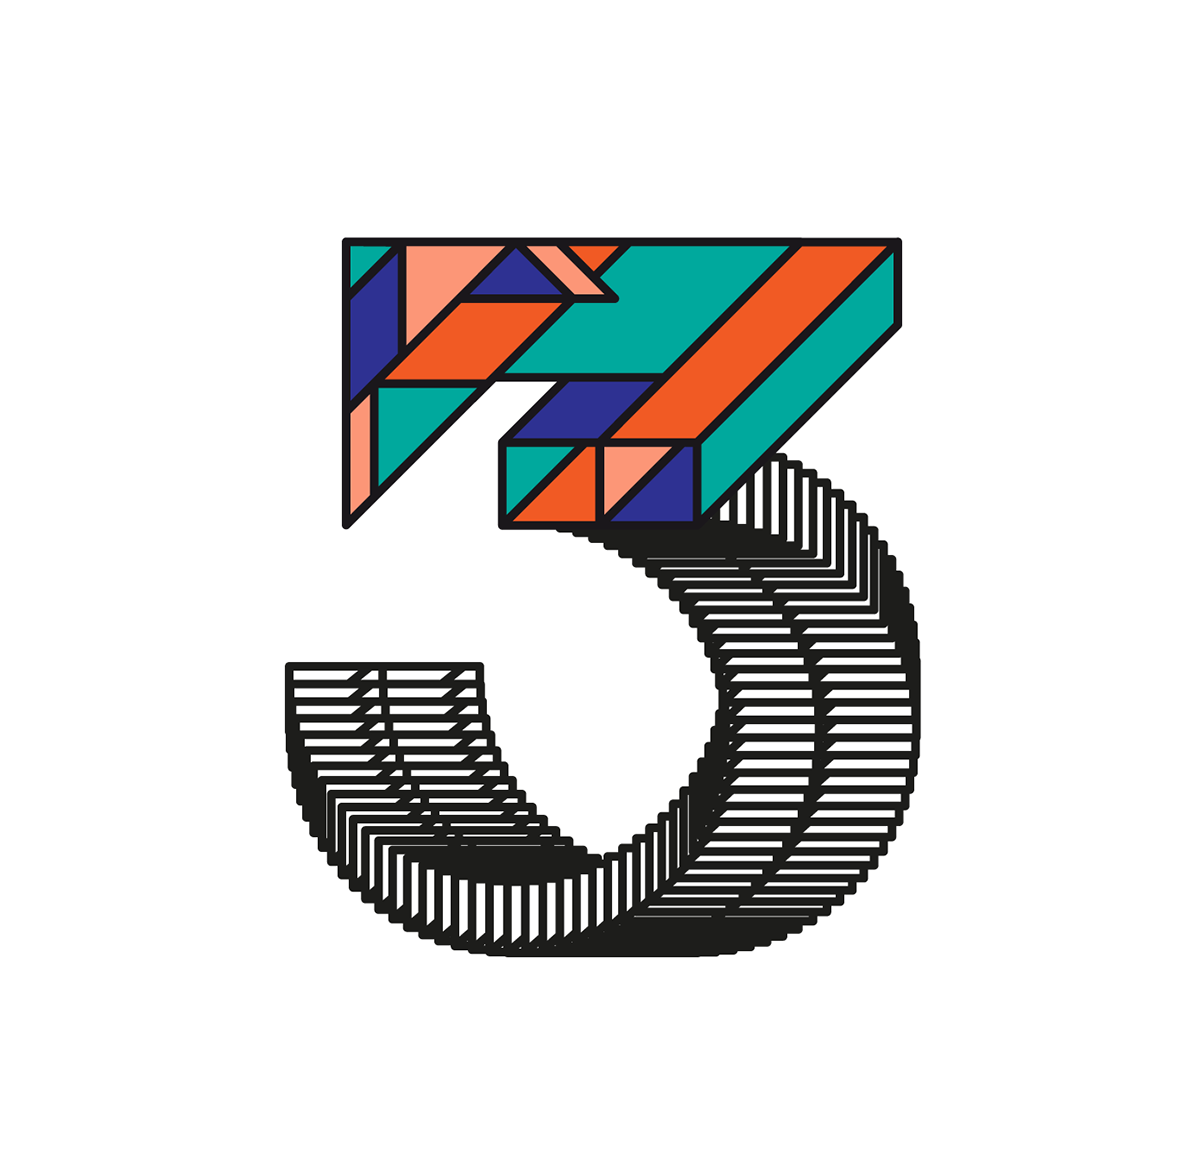 36daysoftype 36 days type Project OPEN CALL typedaily dailytype daily rafa goicoechea graphicdesign experimental letters glyphs black vector